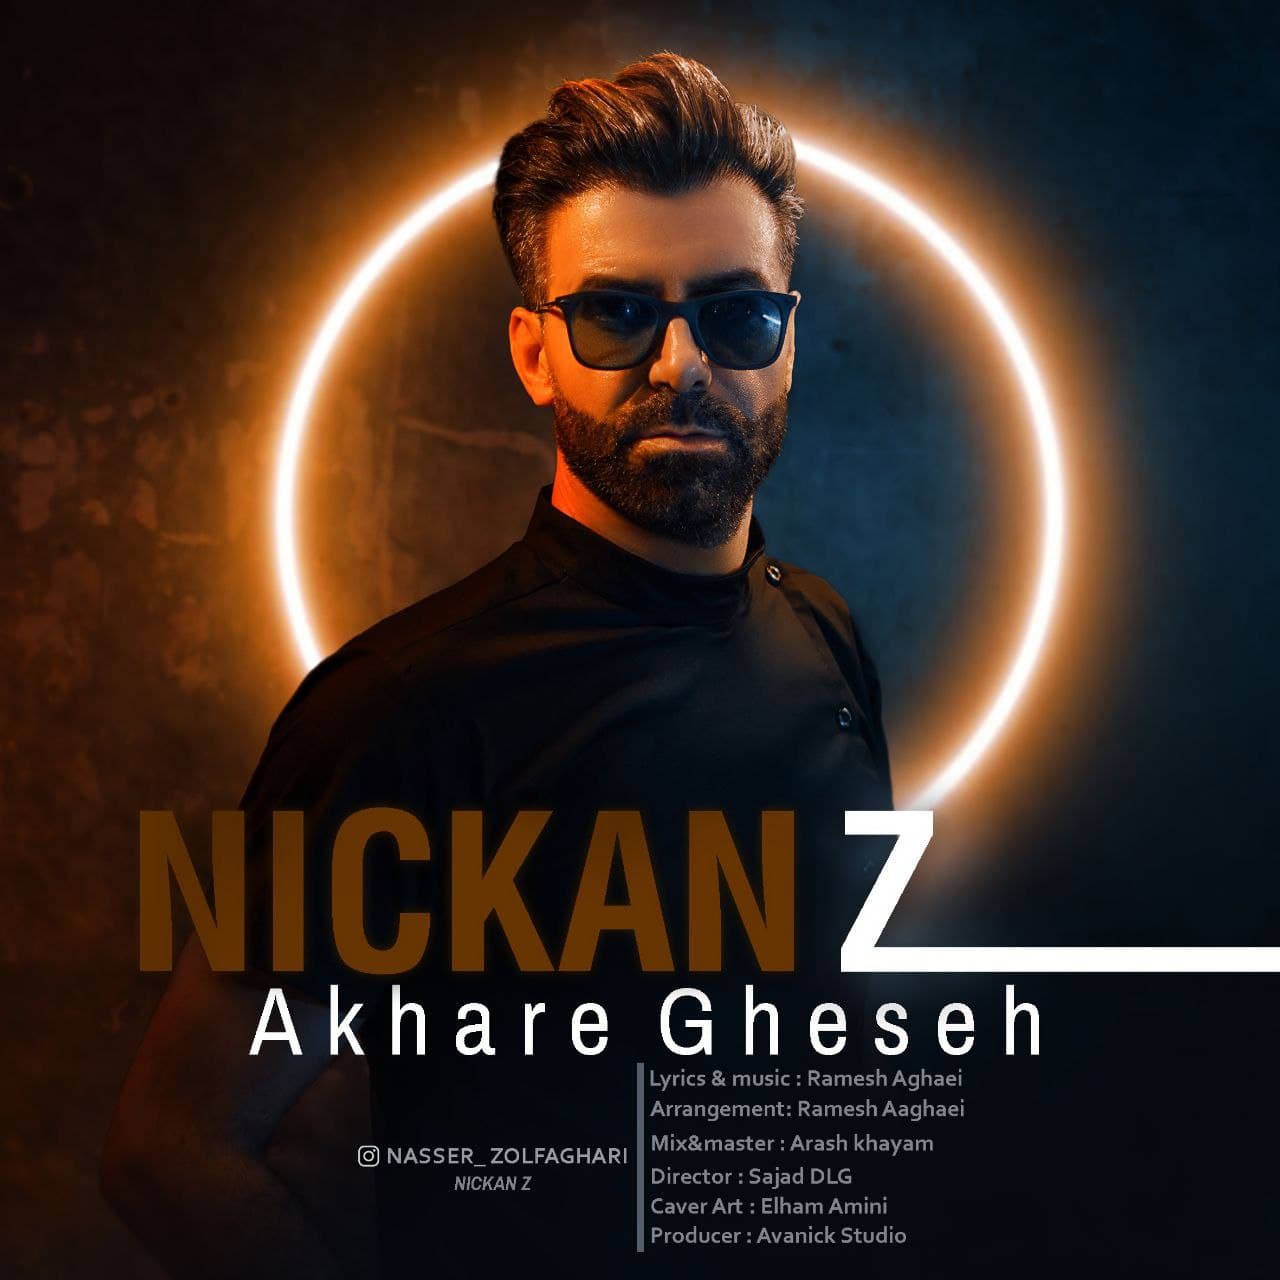 Nickan Z – Akhare Gheseh